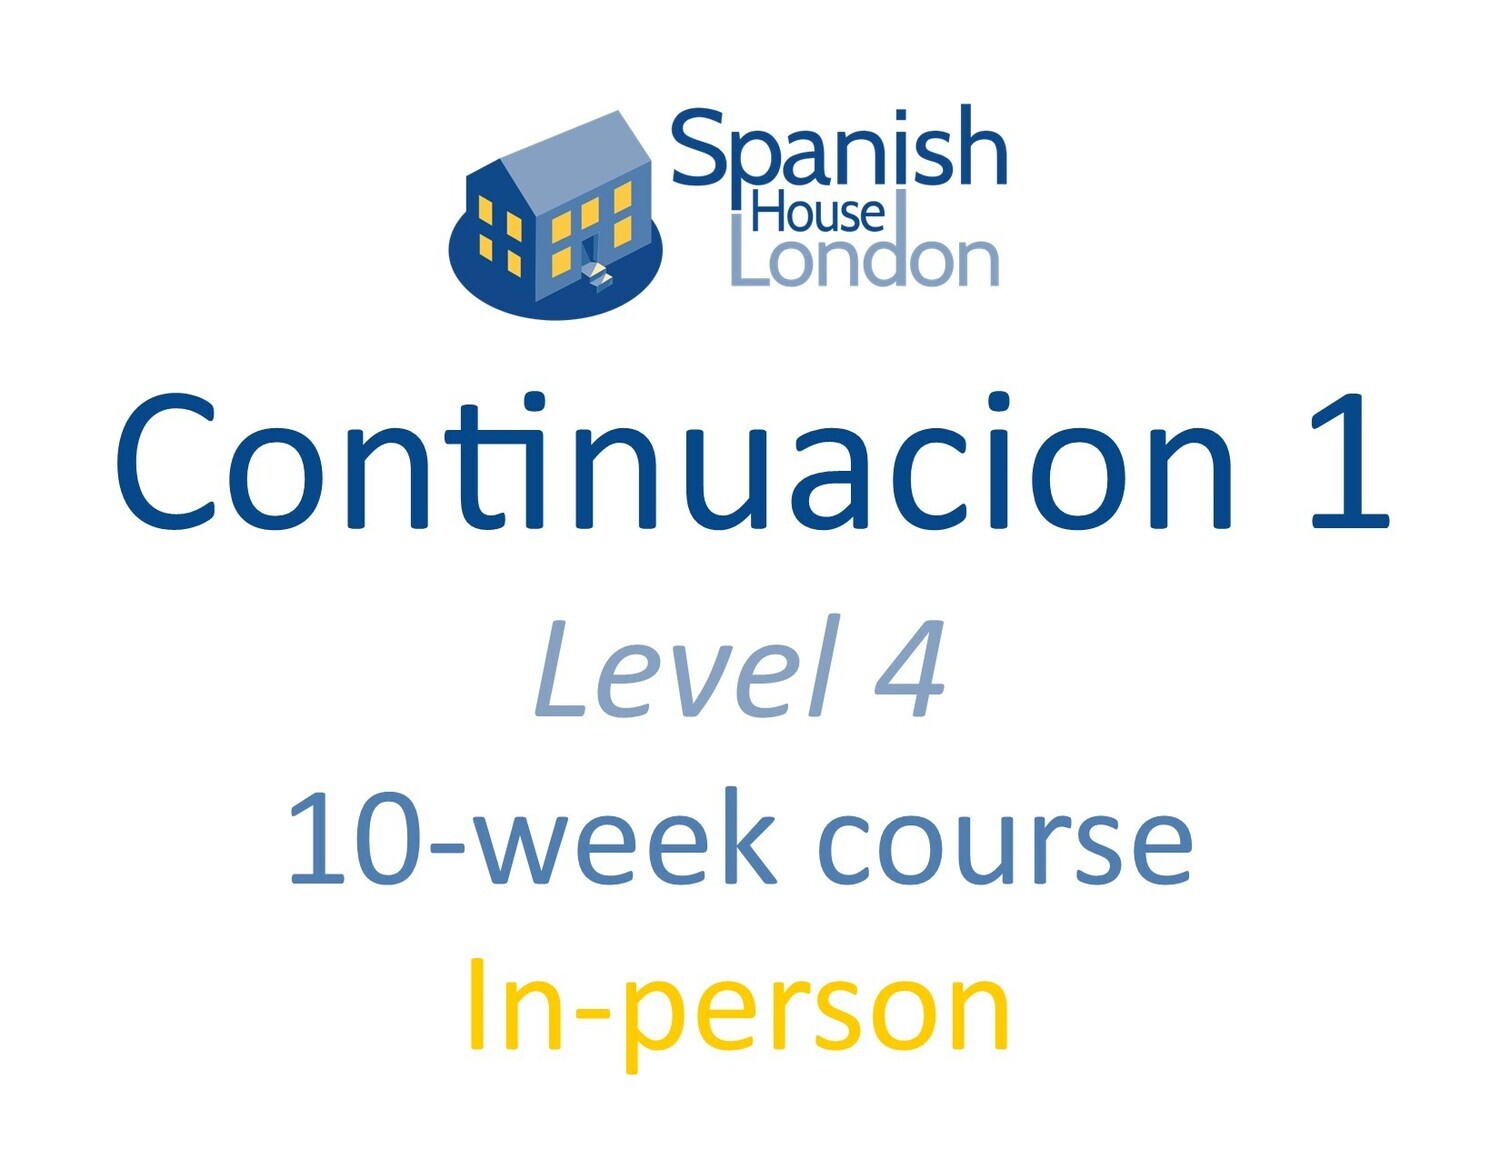 Continuacion 1 Course starting on 23rd August at 6pm in Euston / King's Cross